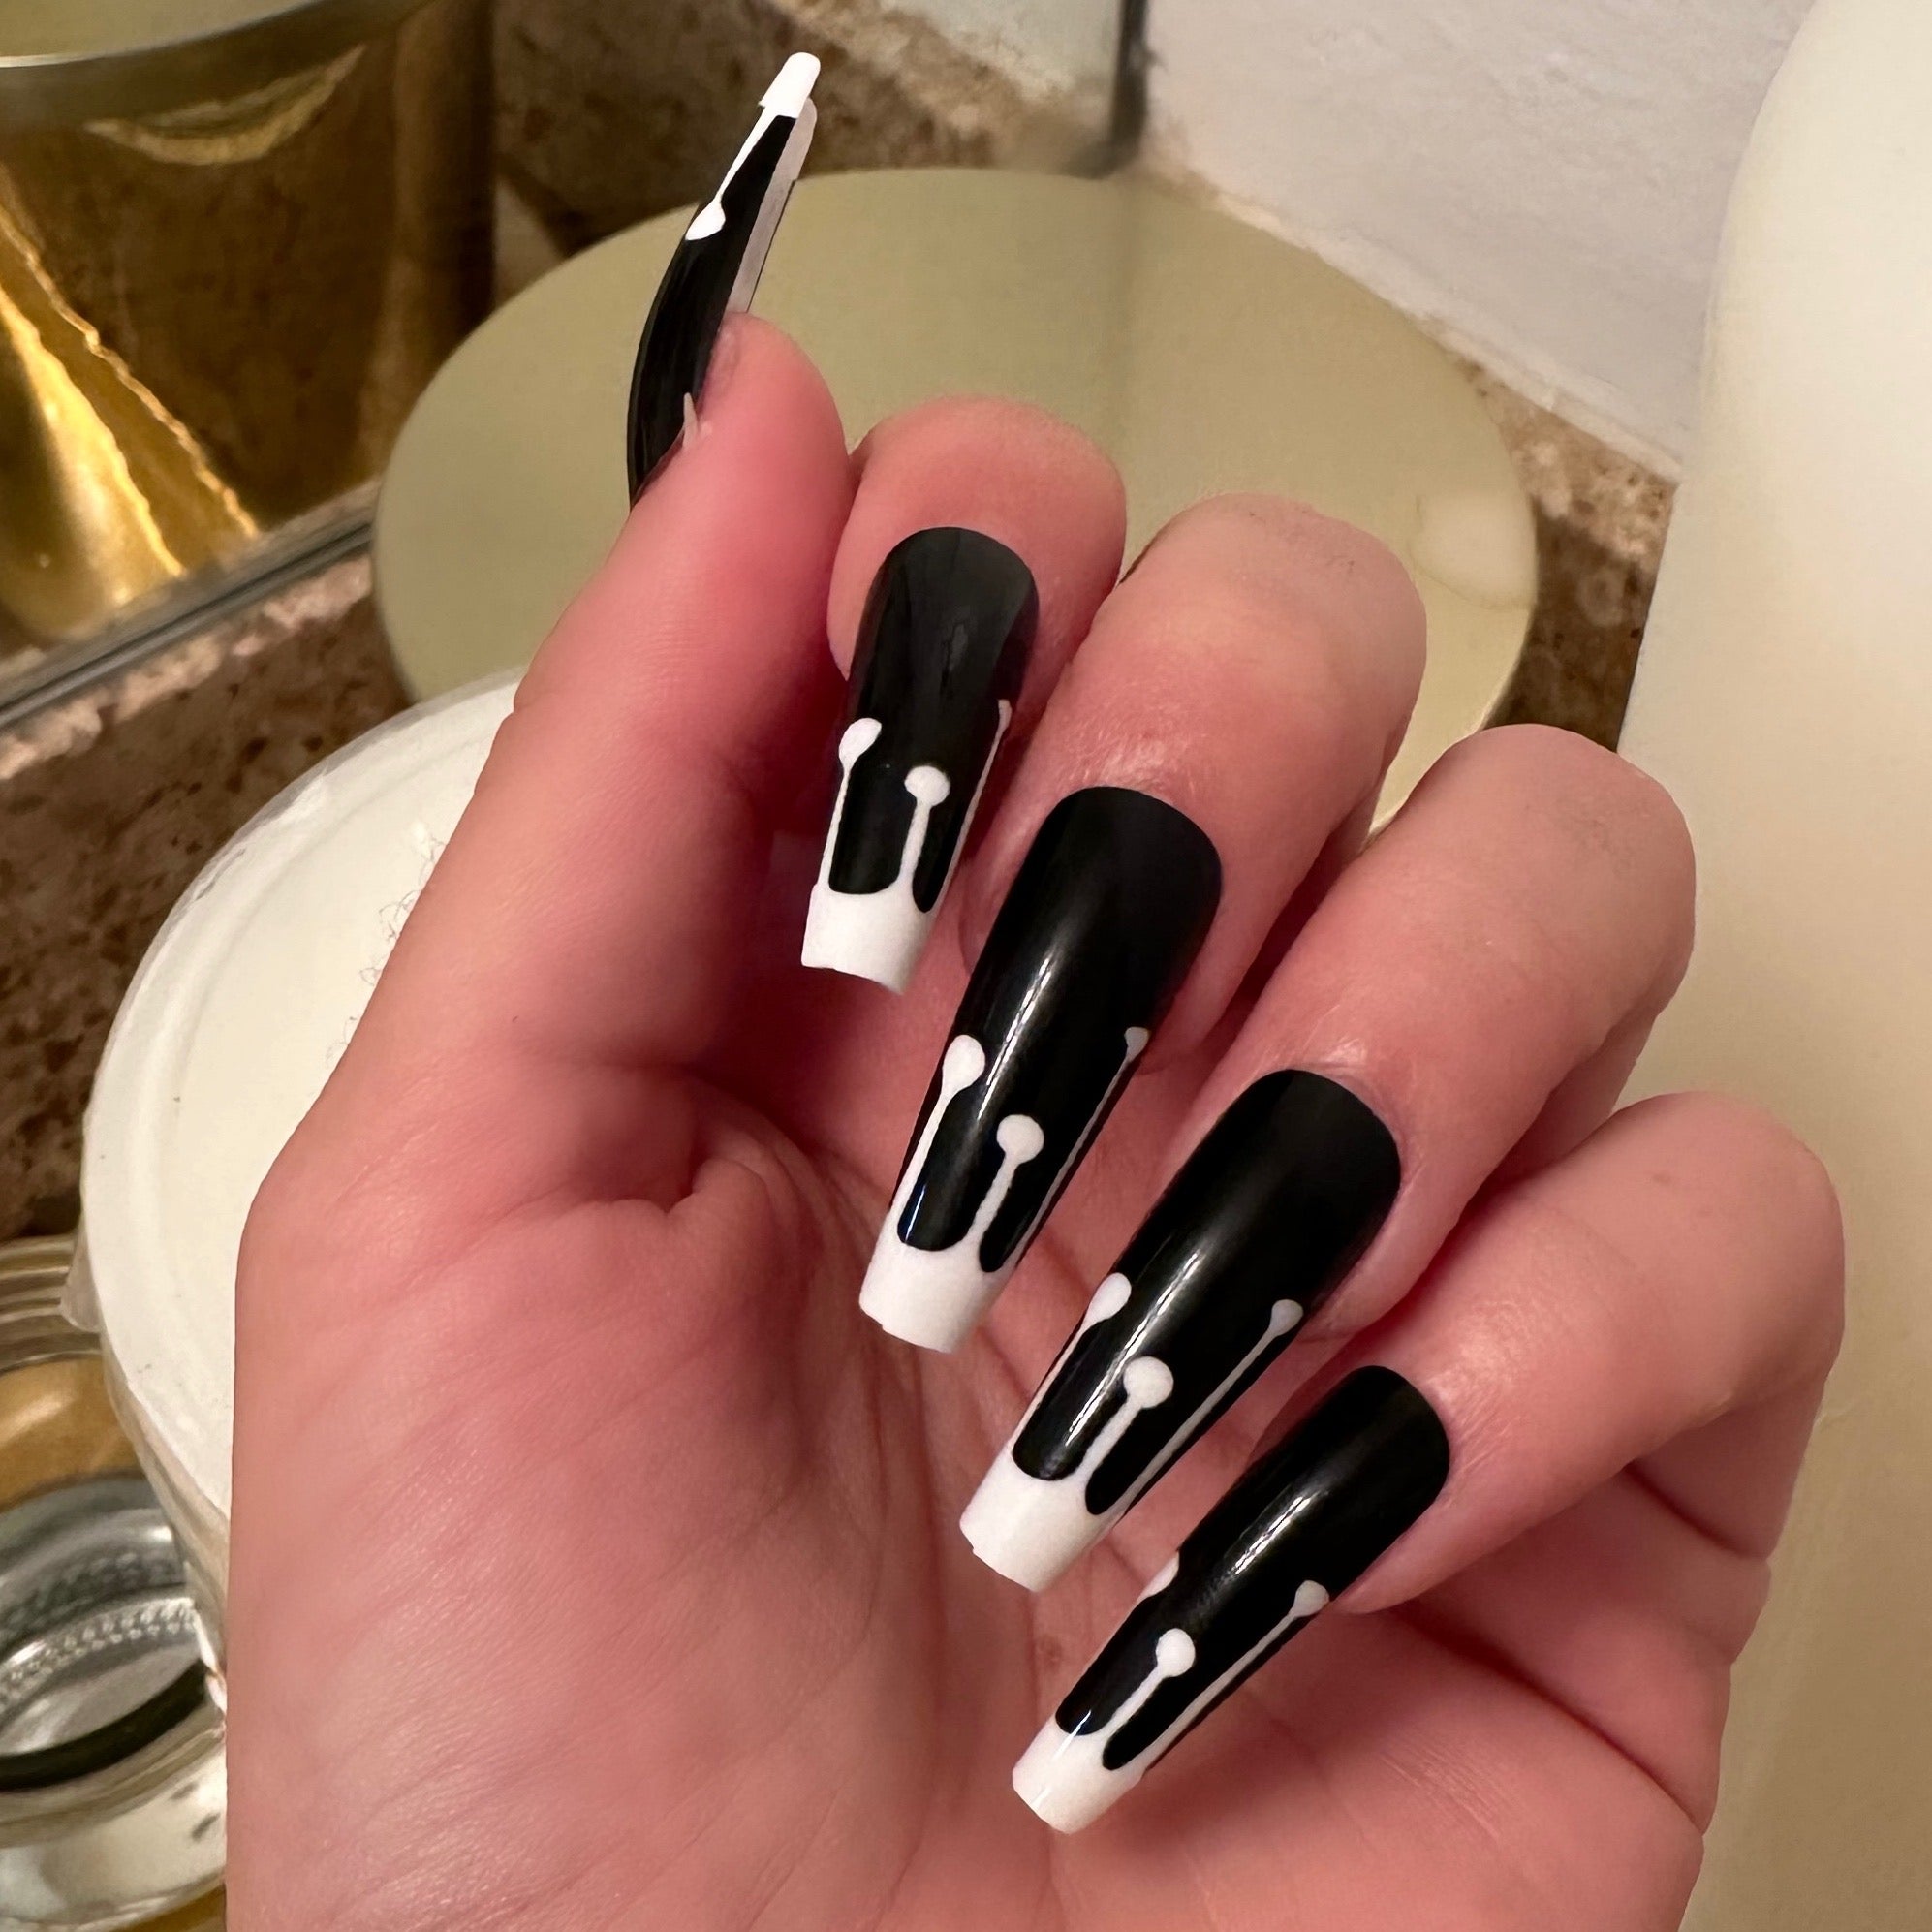 20 Ways to Wear the Coffin Nails Trend AKA Ballerina Nails